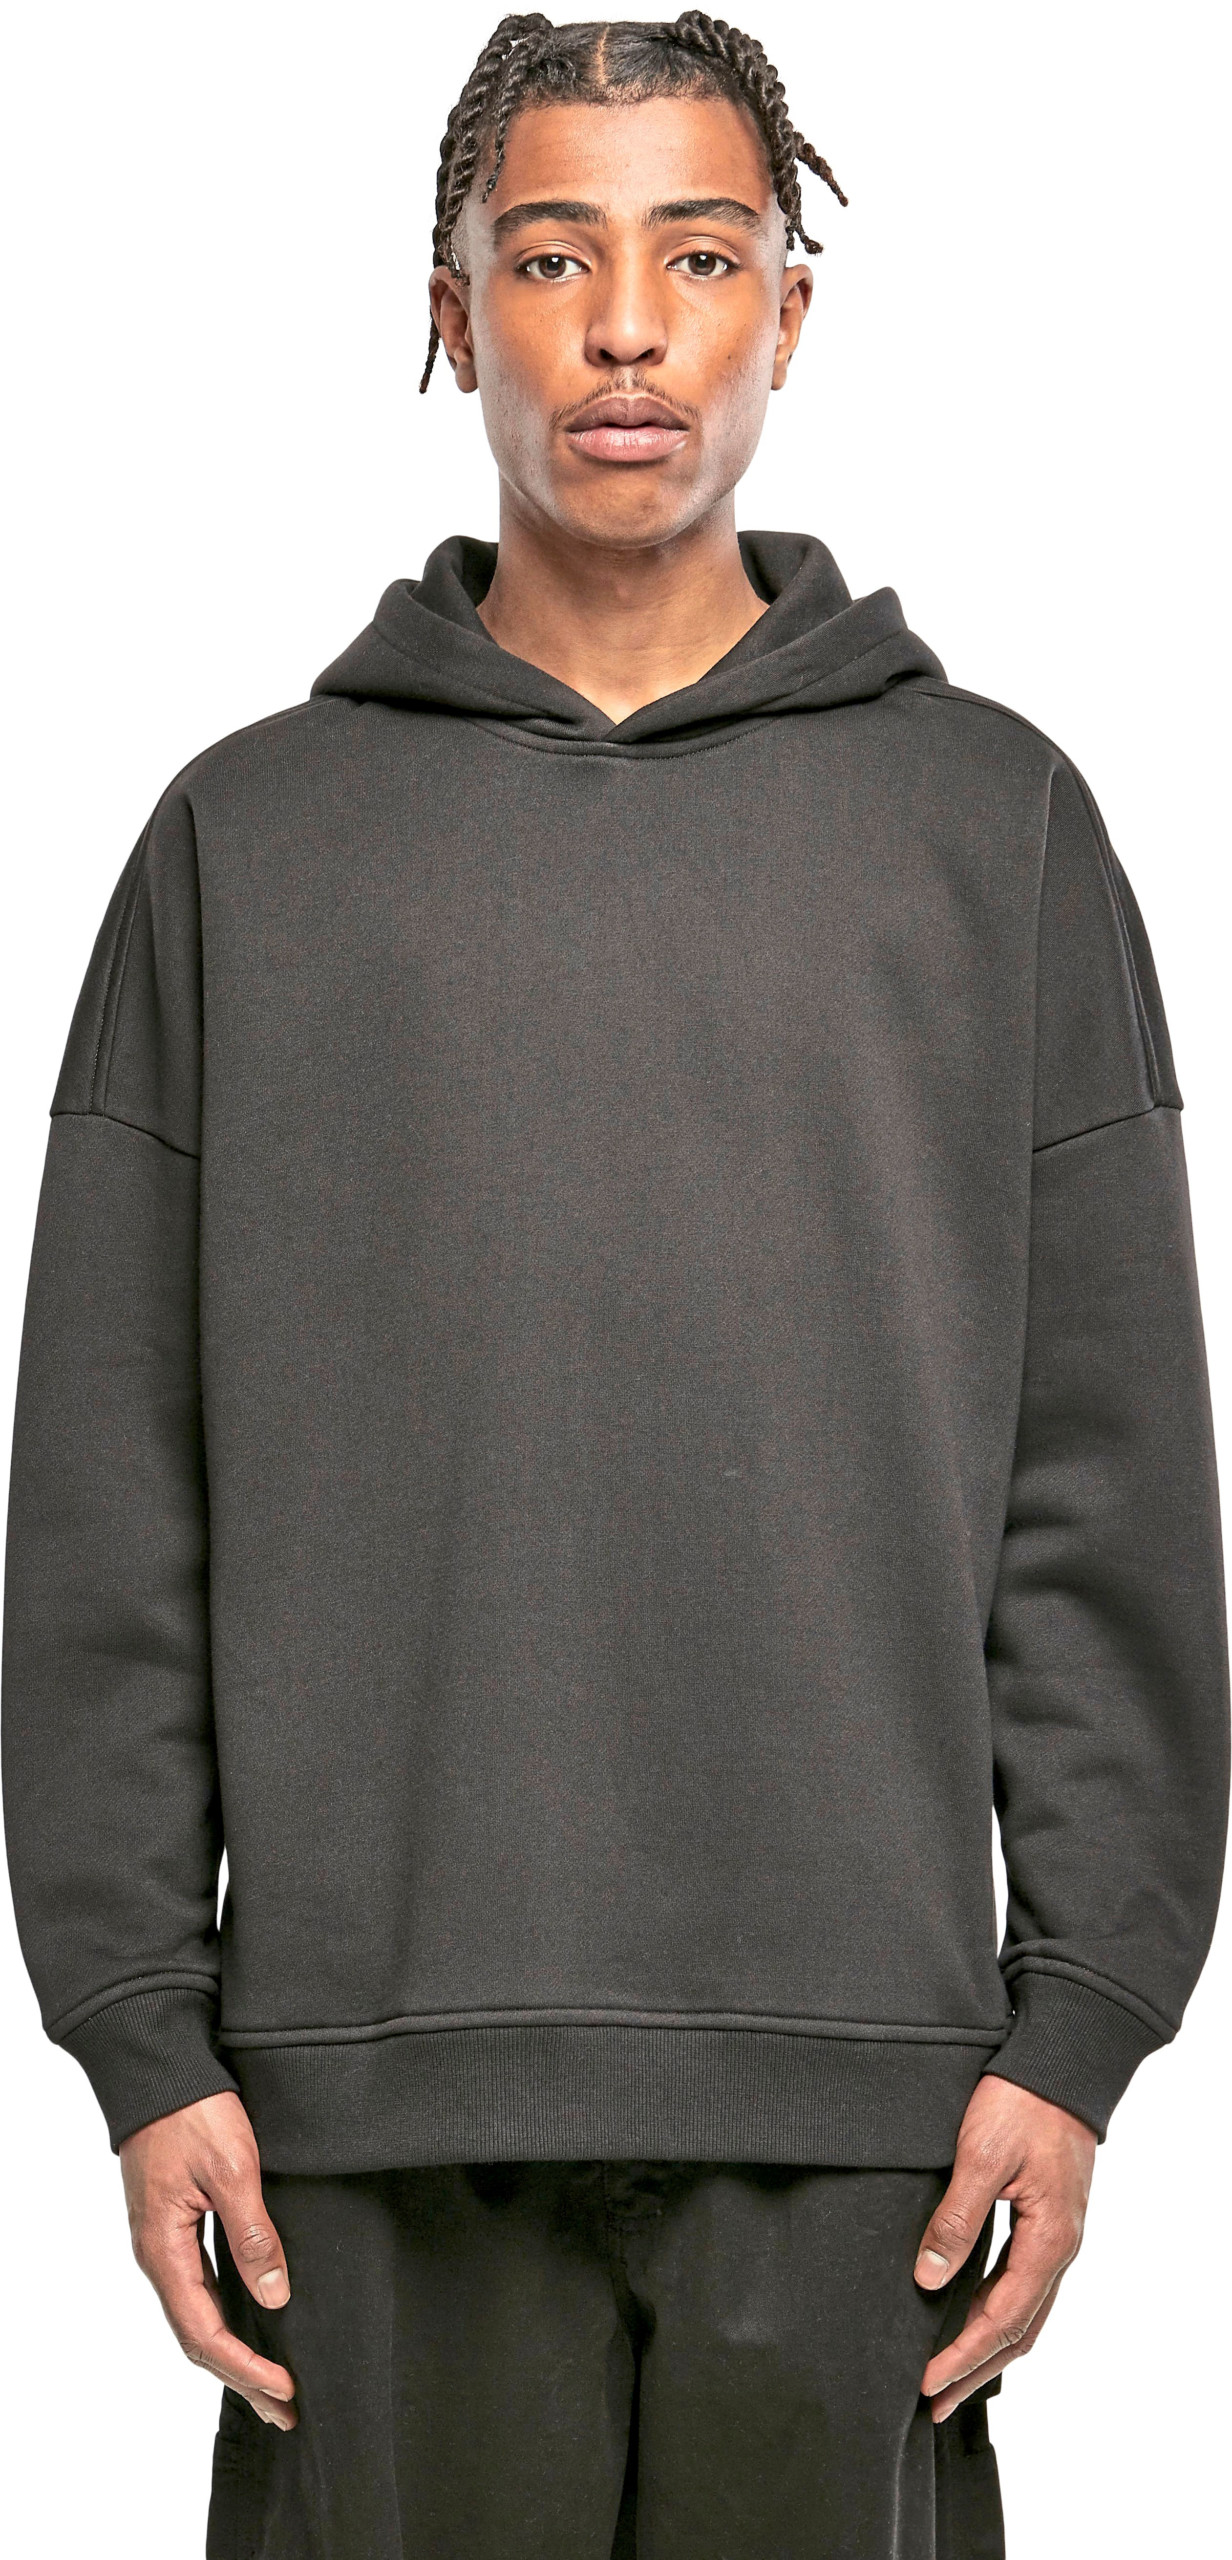 Hoodys - Build Your Brand - Oversized Cut On Sleeve Hoody - BY199